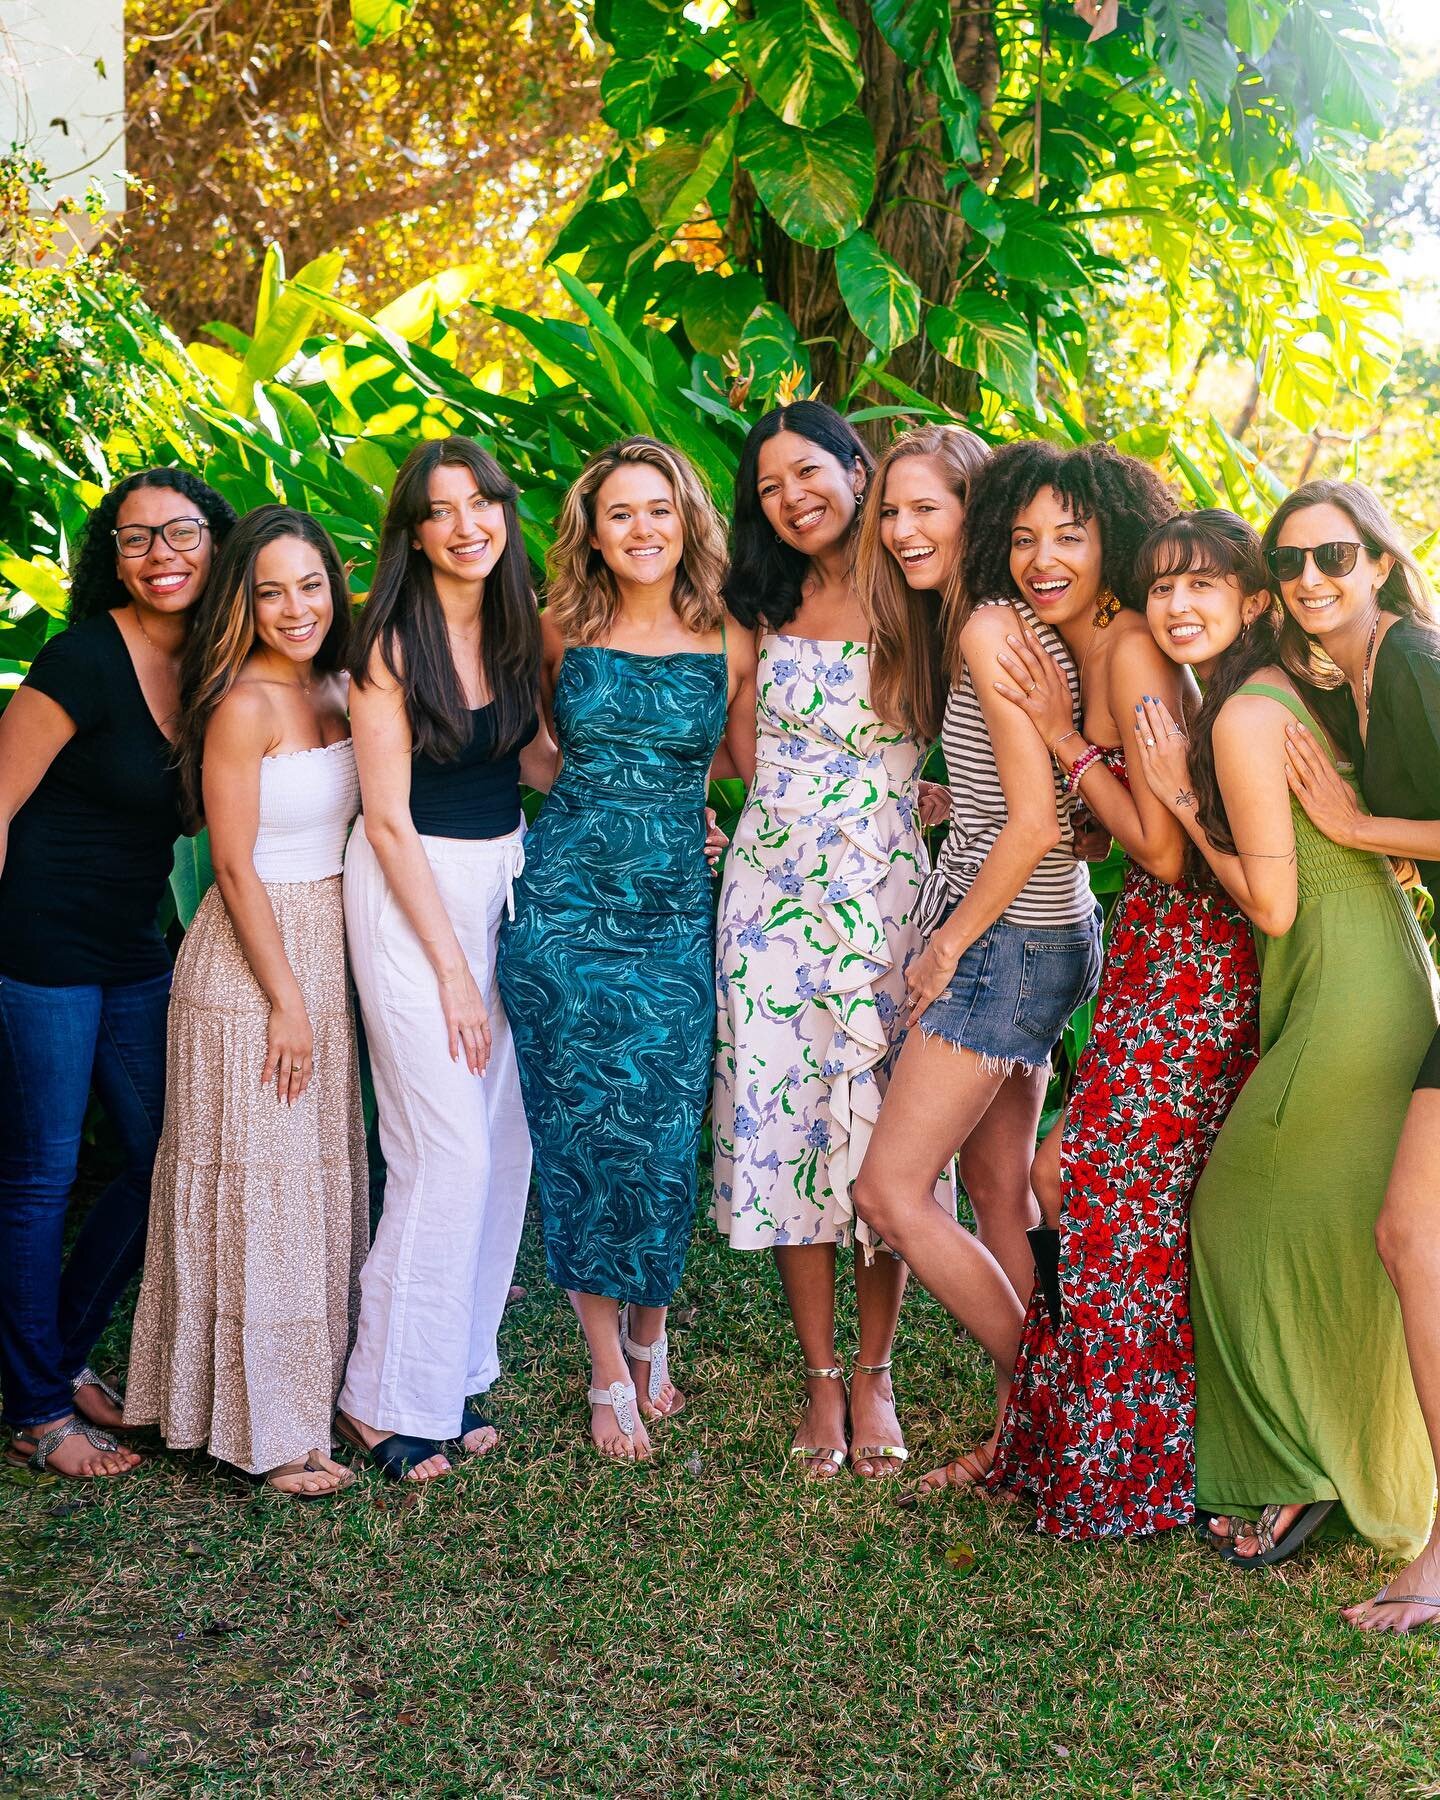 🇲🇽 What happens when you travel to Mexico to meet up with 14 of the best vegans the world has ever seen? PURE JOY! 🎵 @onegreatvegan 

⭐️ Recently I was blessed to visit the beautiful beaches of Mexico for a powerful retreat surrounded by positivit